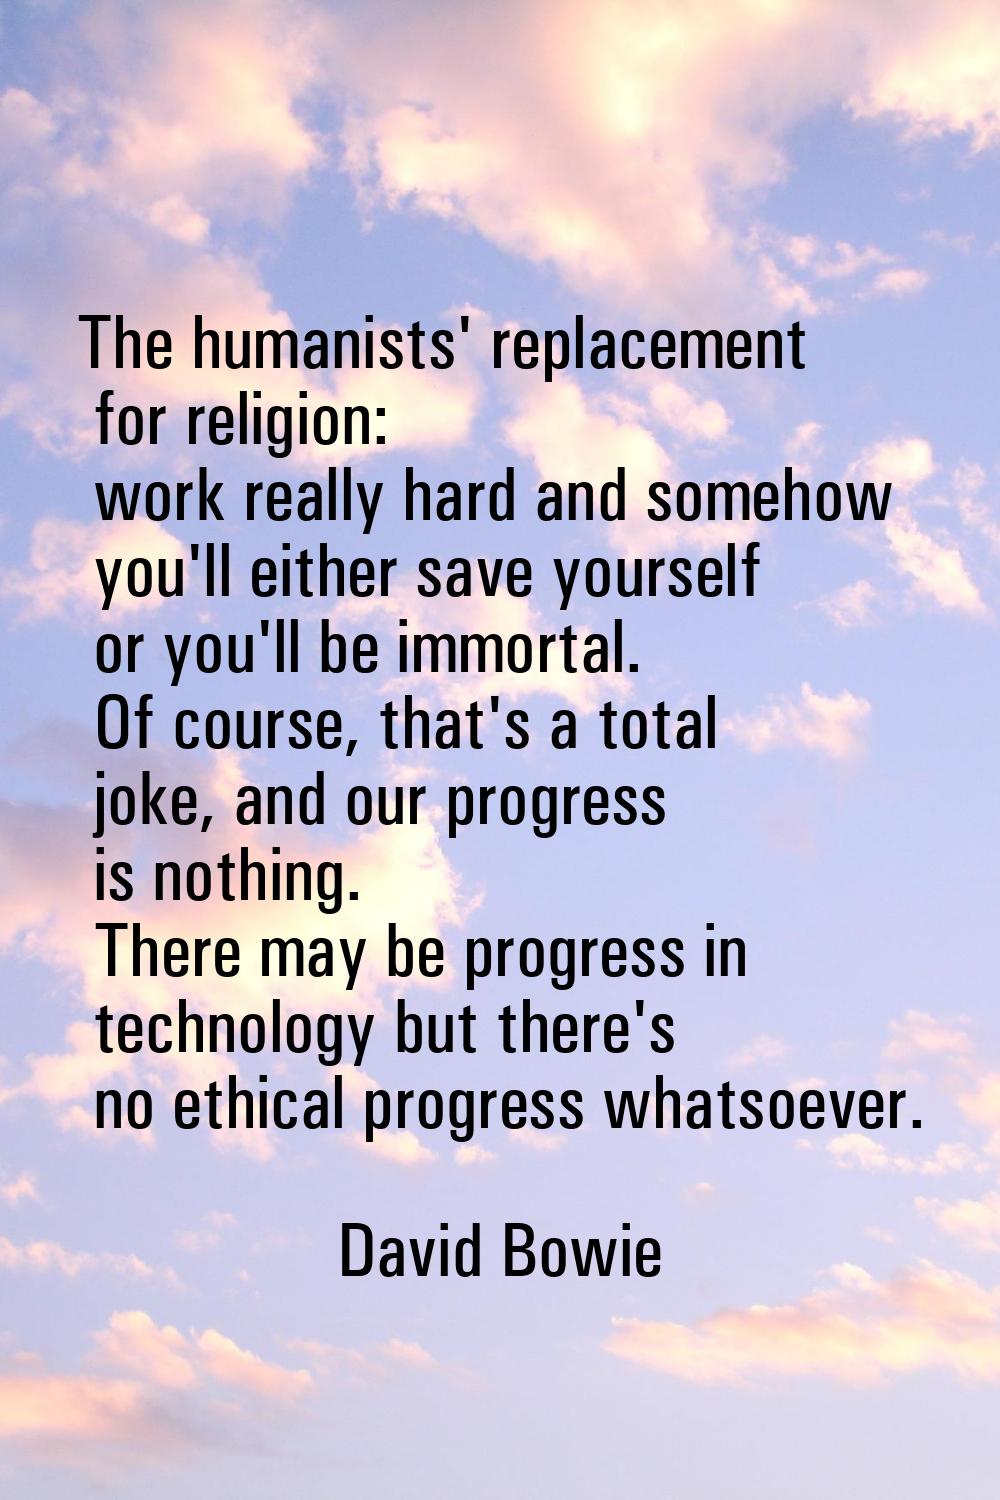 The humanists' replacement for religion: work really hard and somehow you'll either save yourself o